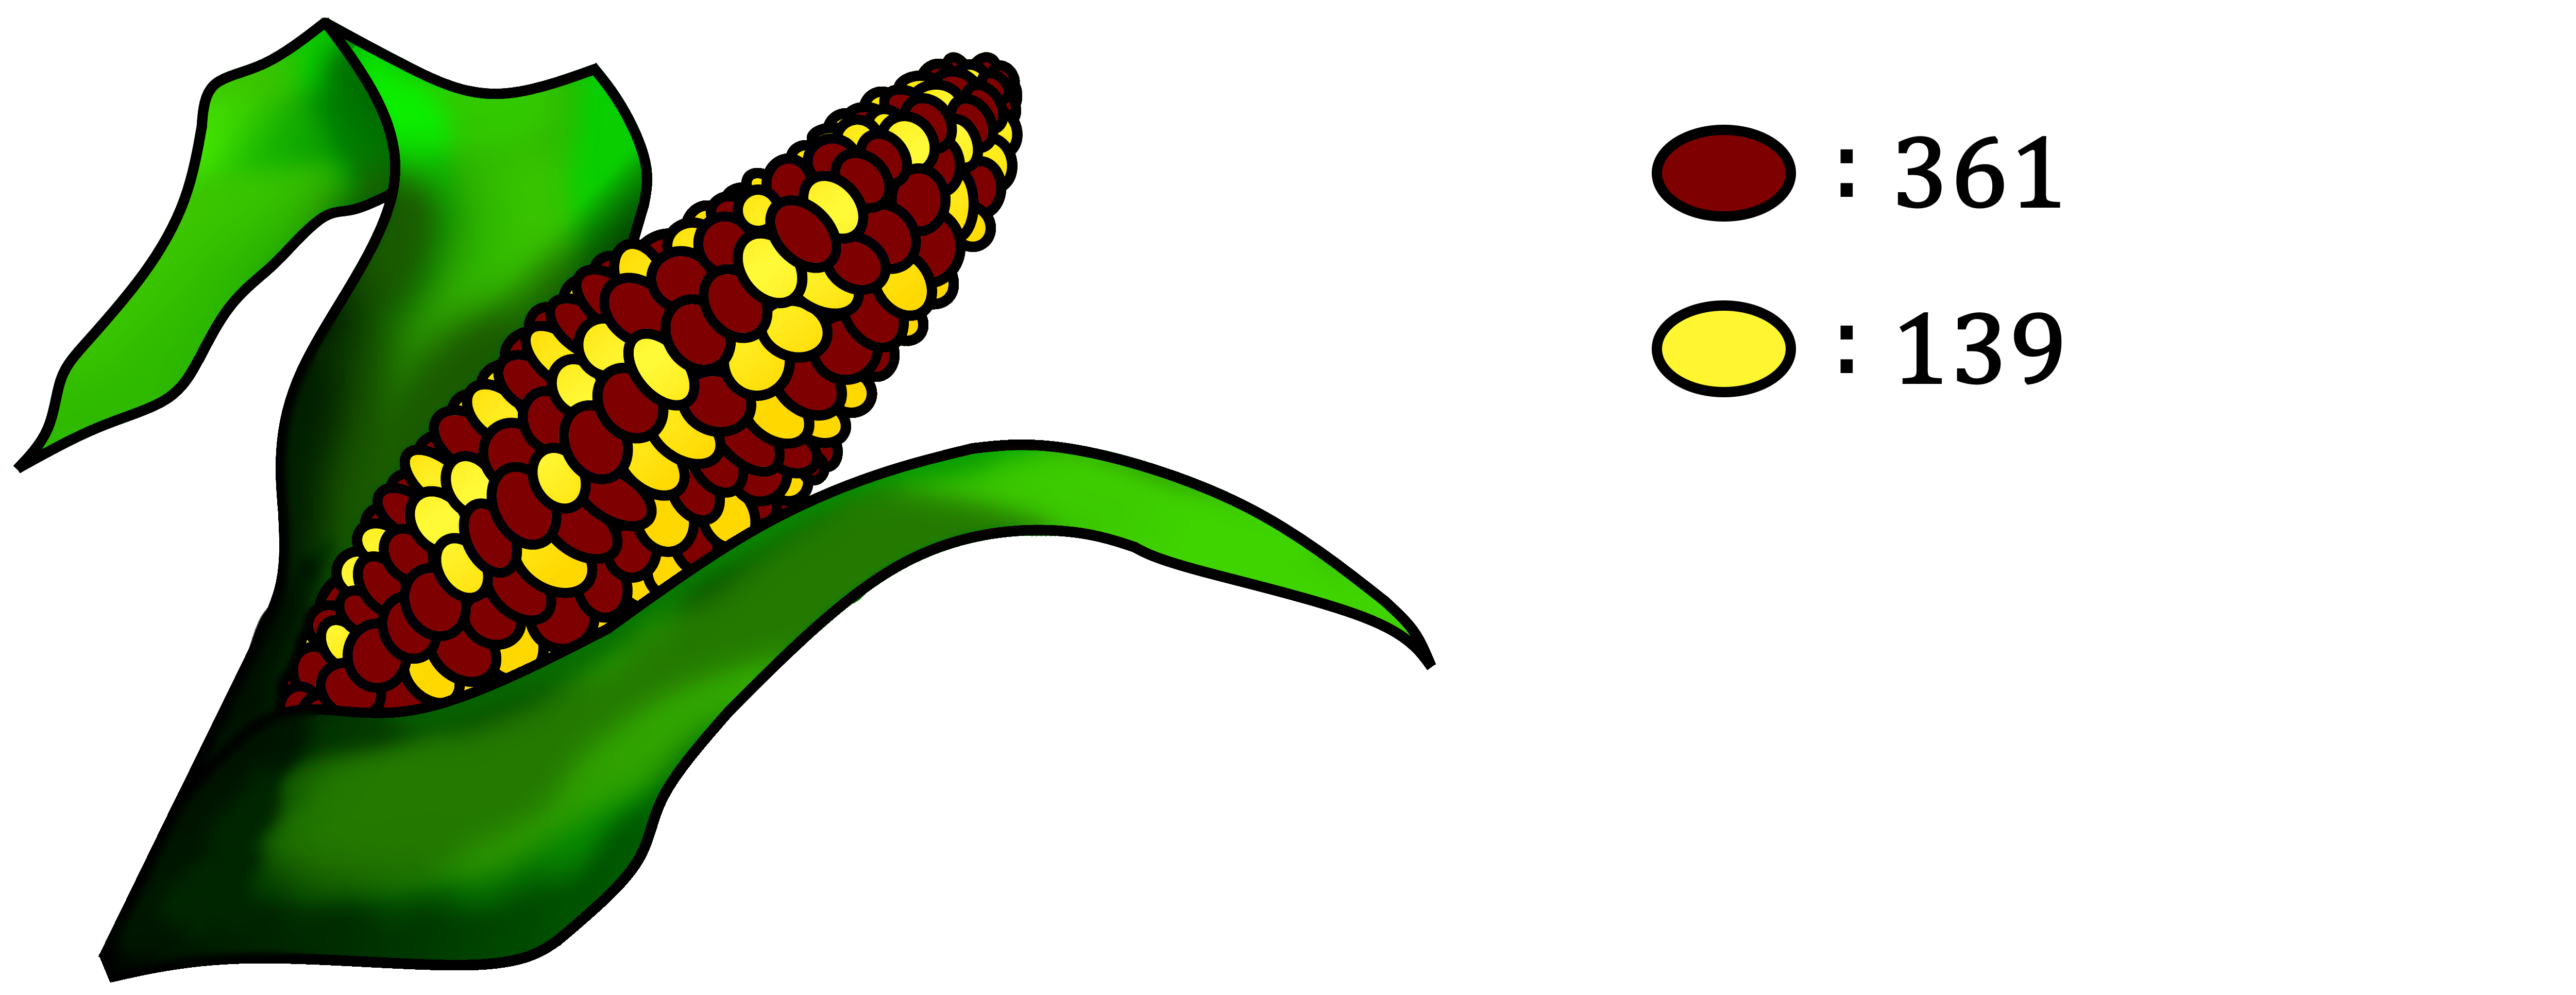 A cob of corn with differently colored kernels.